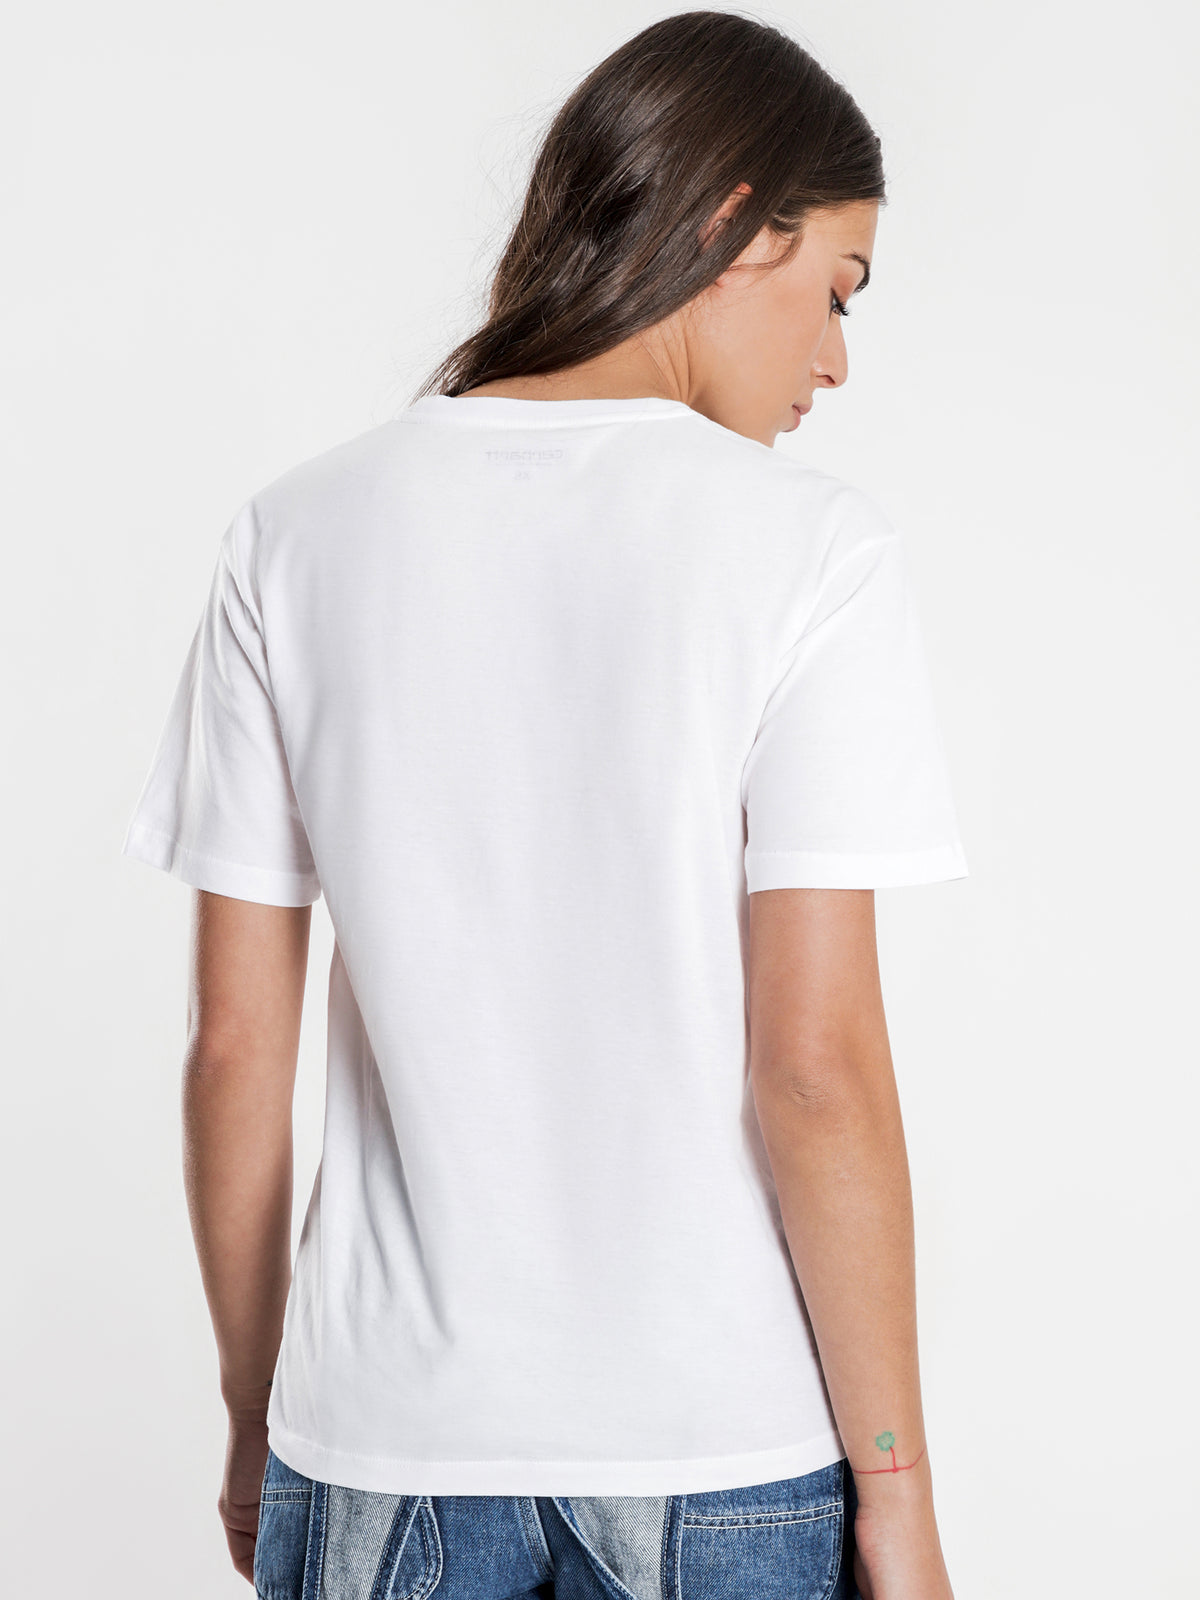 Chase Short Sleeve T-Shirt in White